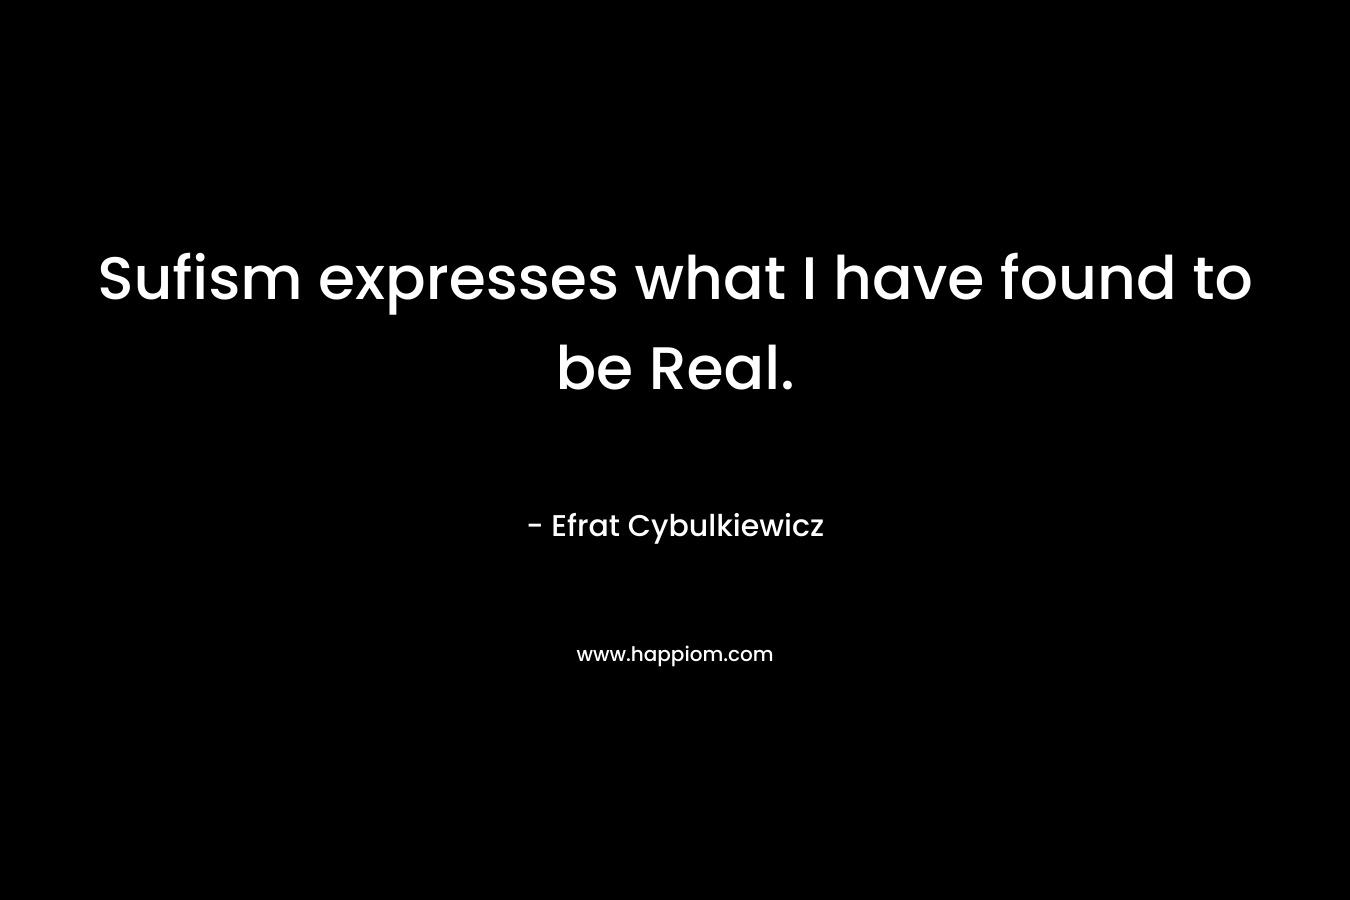 Sufism expresses what I have found to be Real. – Efrat Cybulkiewicz